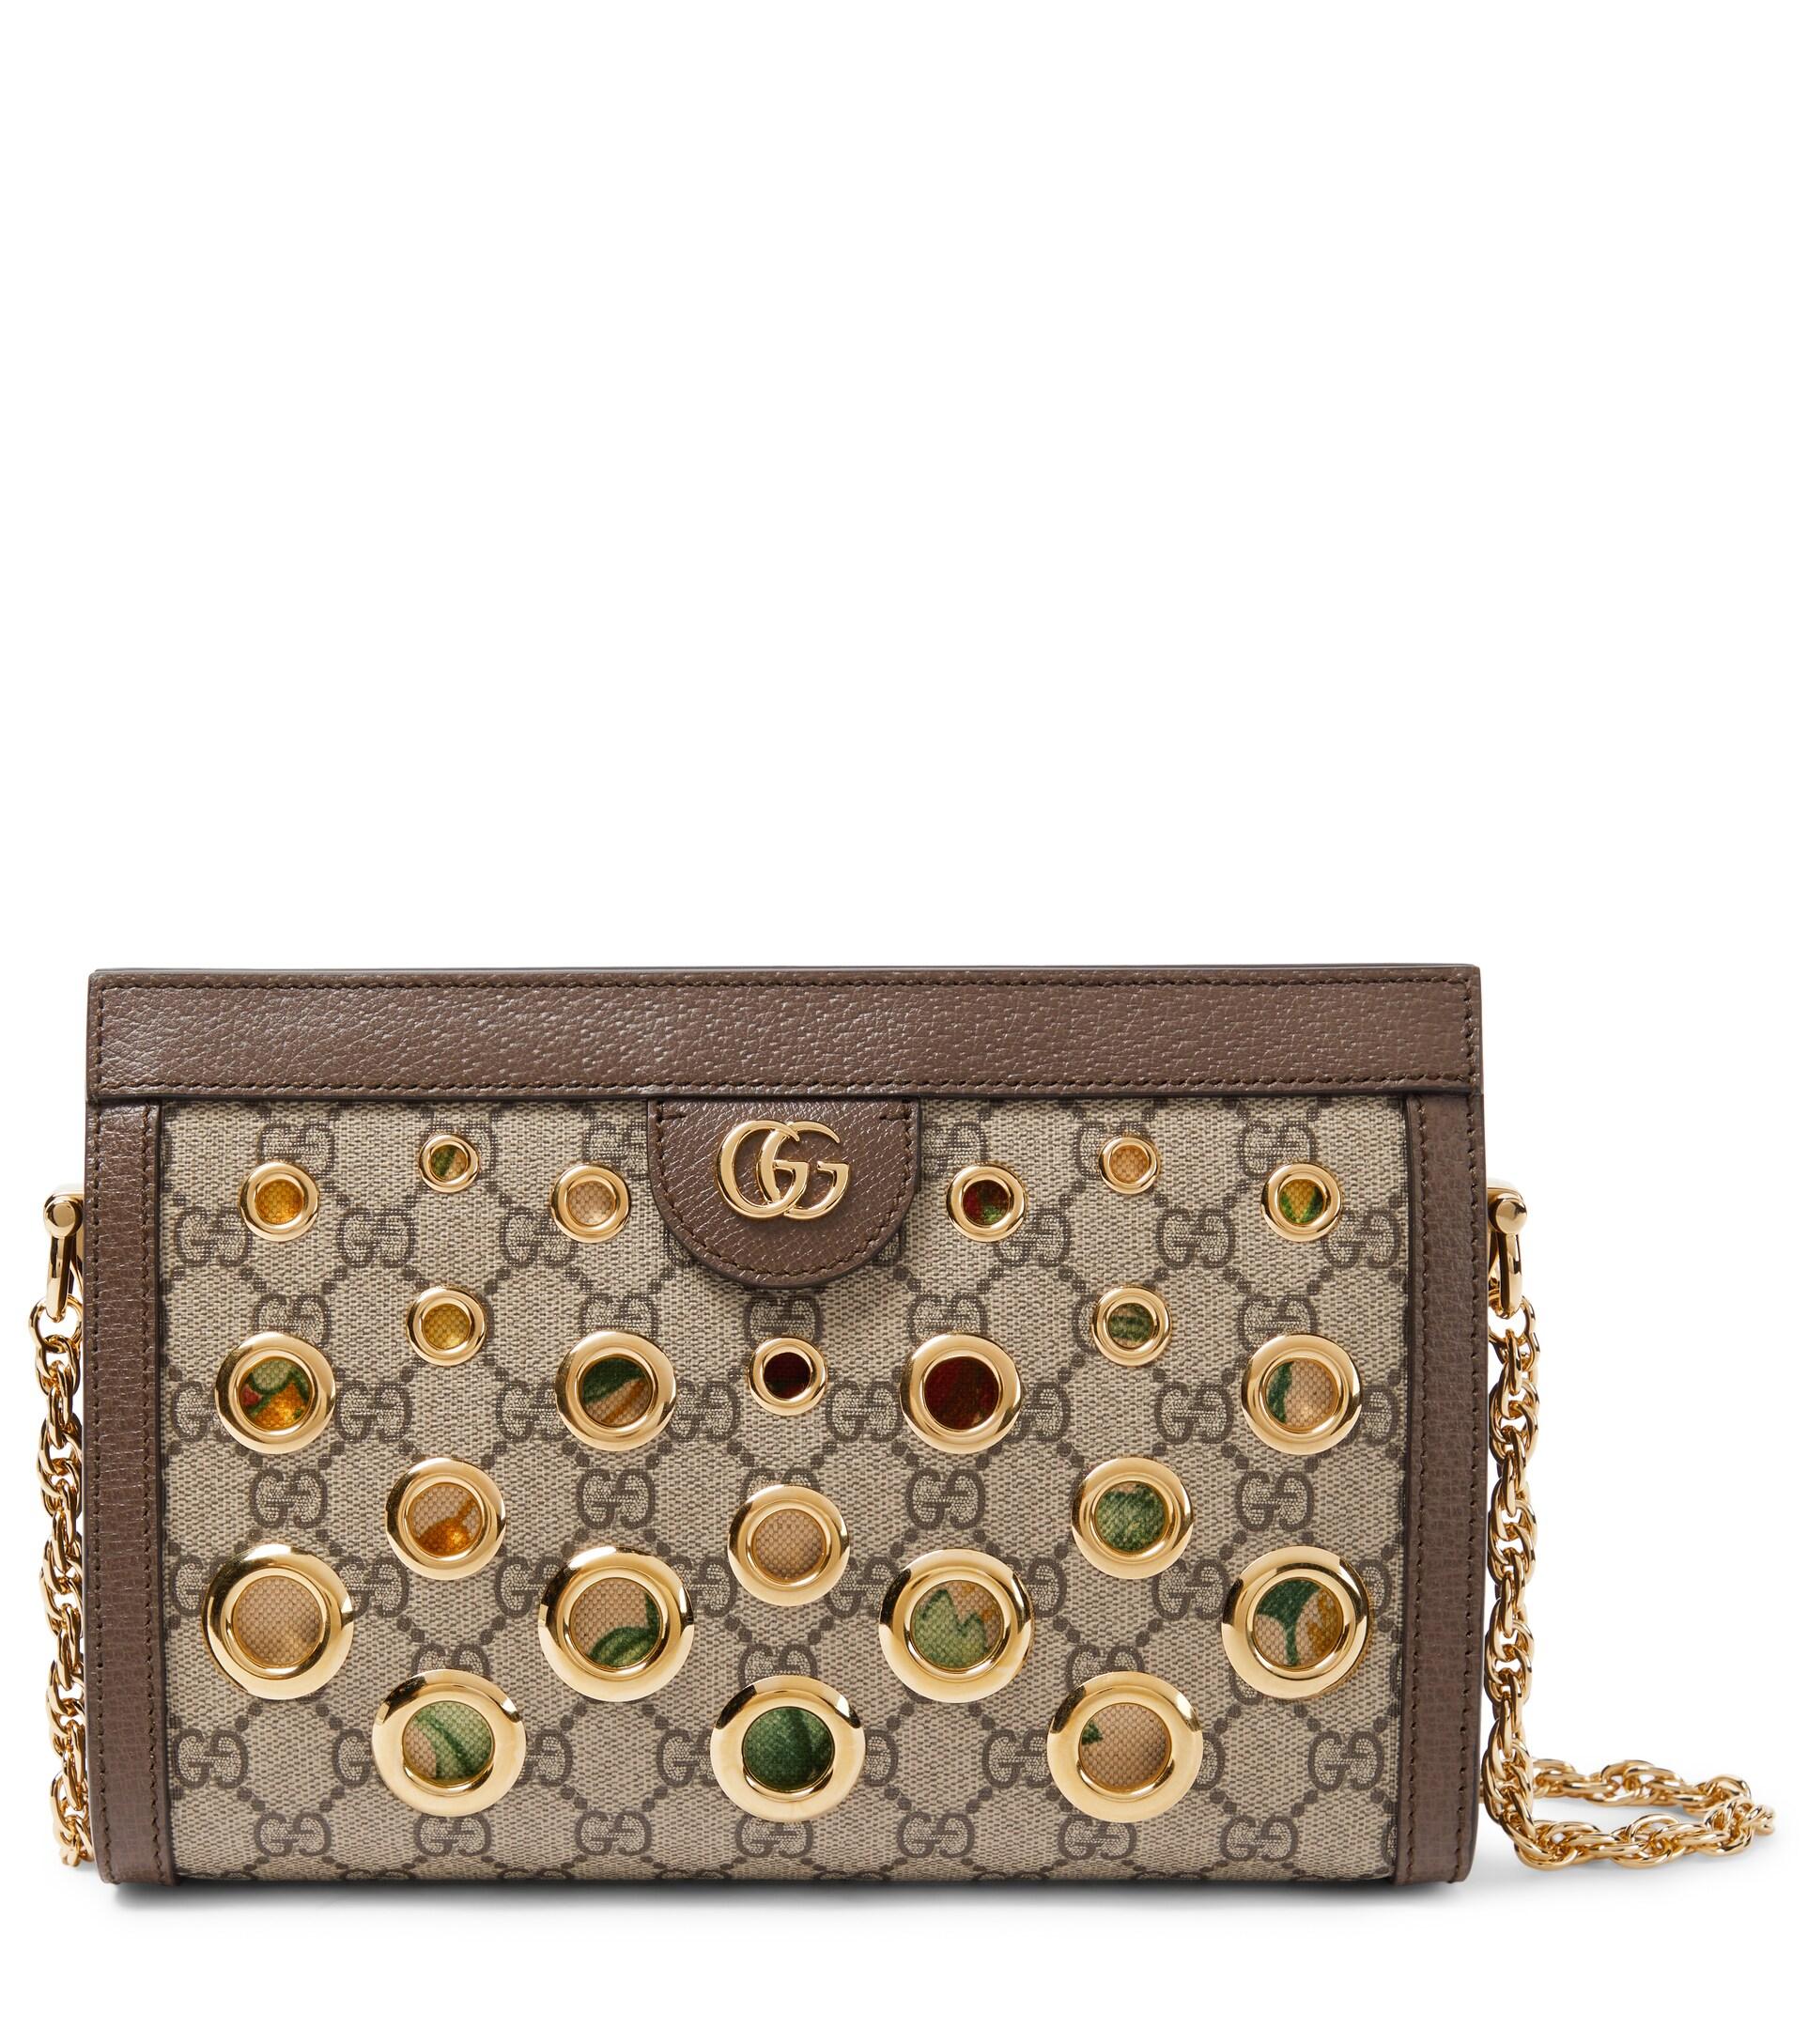 Gucci Ophidia GG Small Embellished Shoulder Bag in Metallic | Lyst